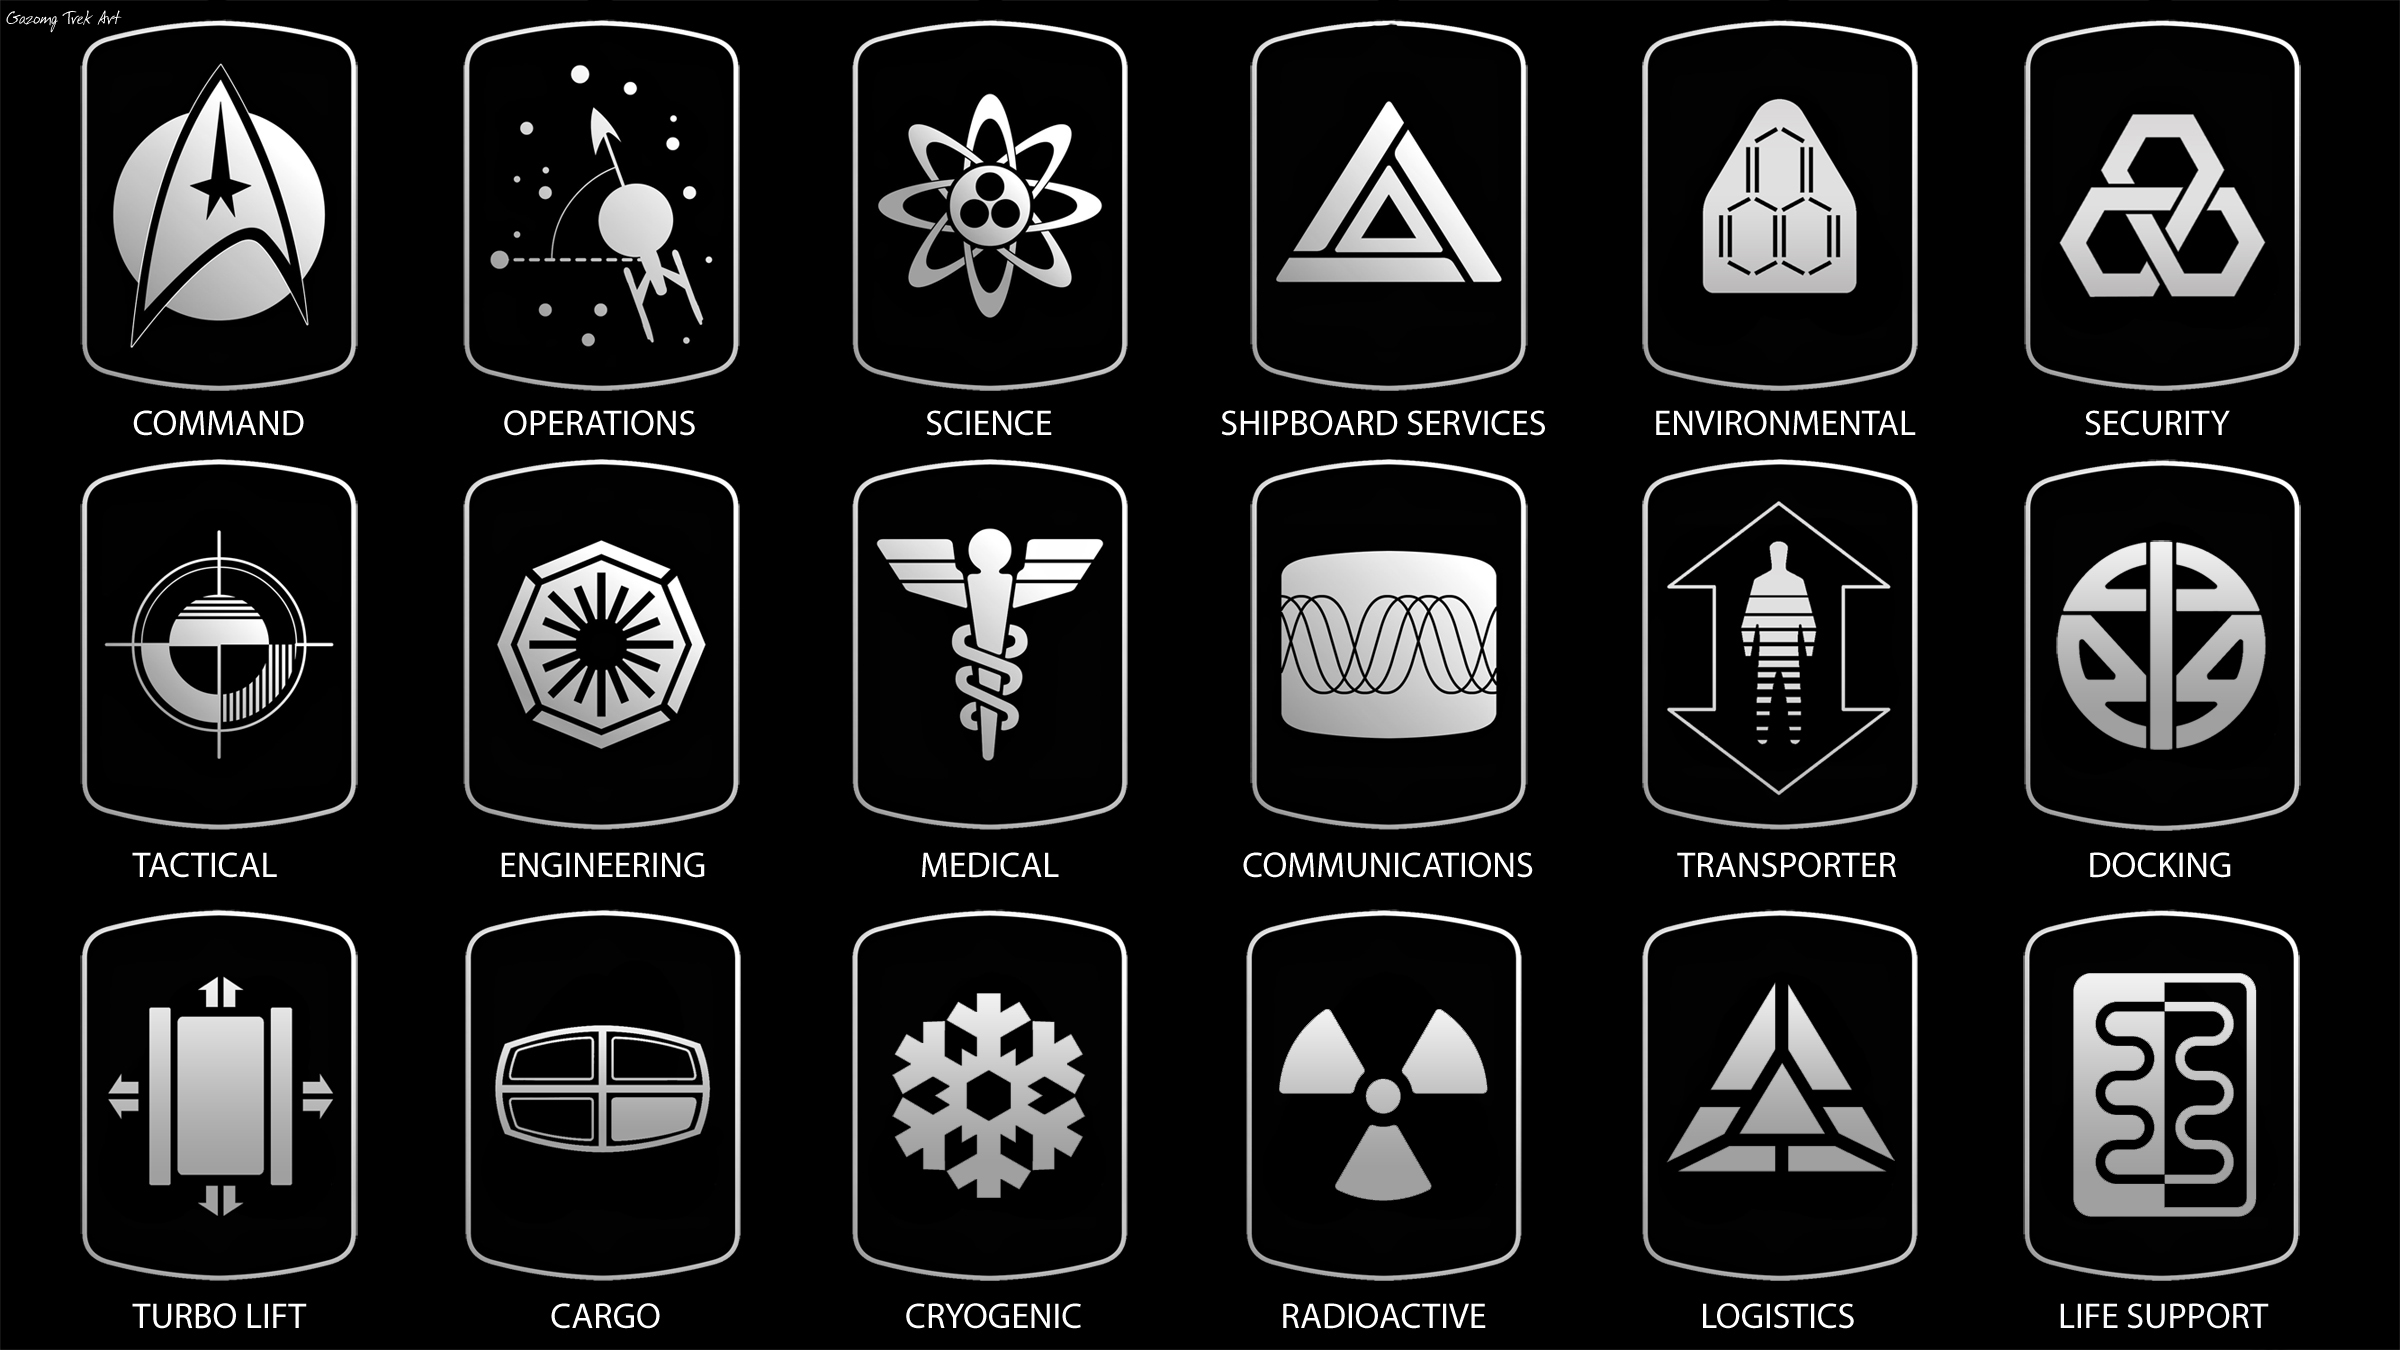 Star Trek Signage Department Logos and Insignia by Gazomg on DeviantArt